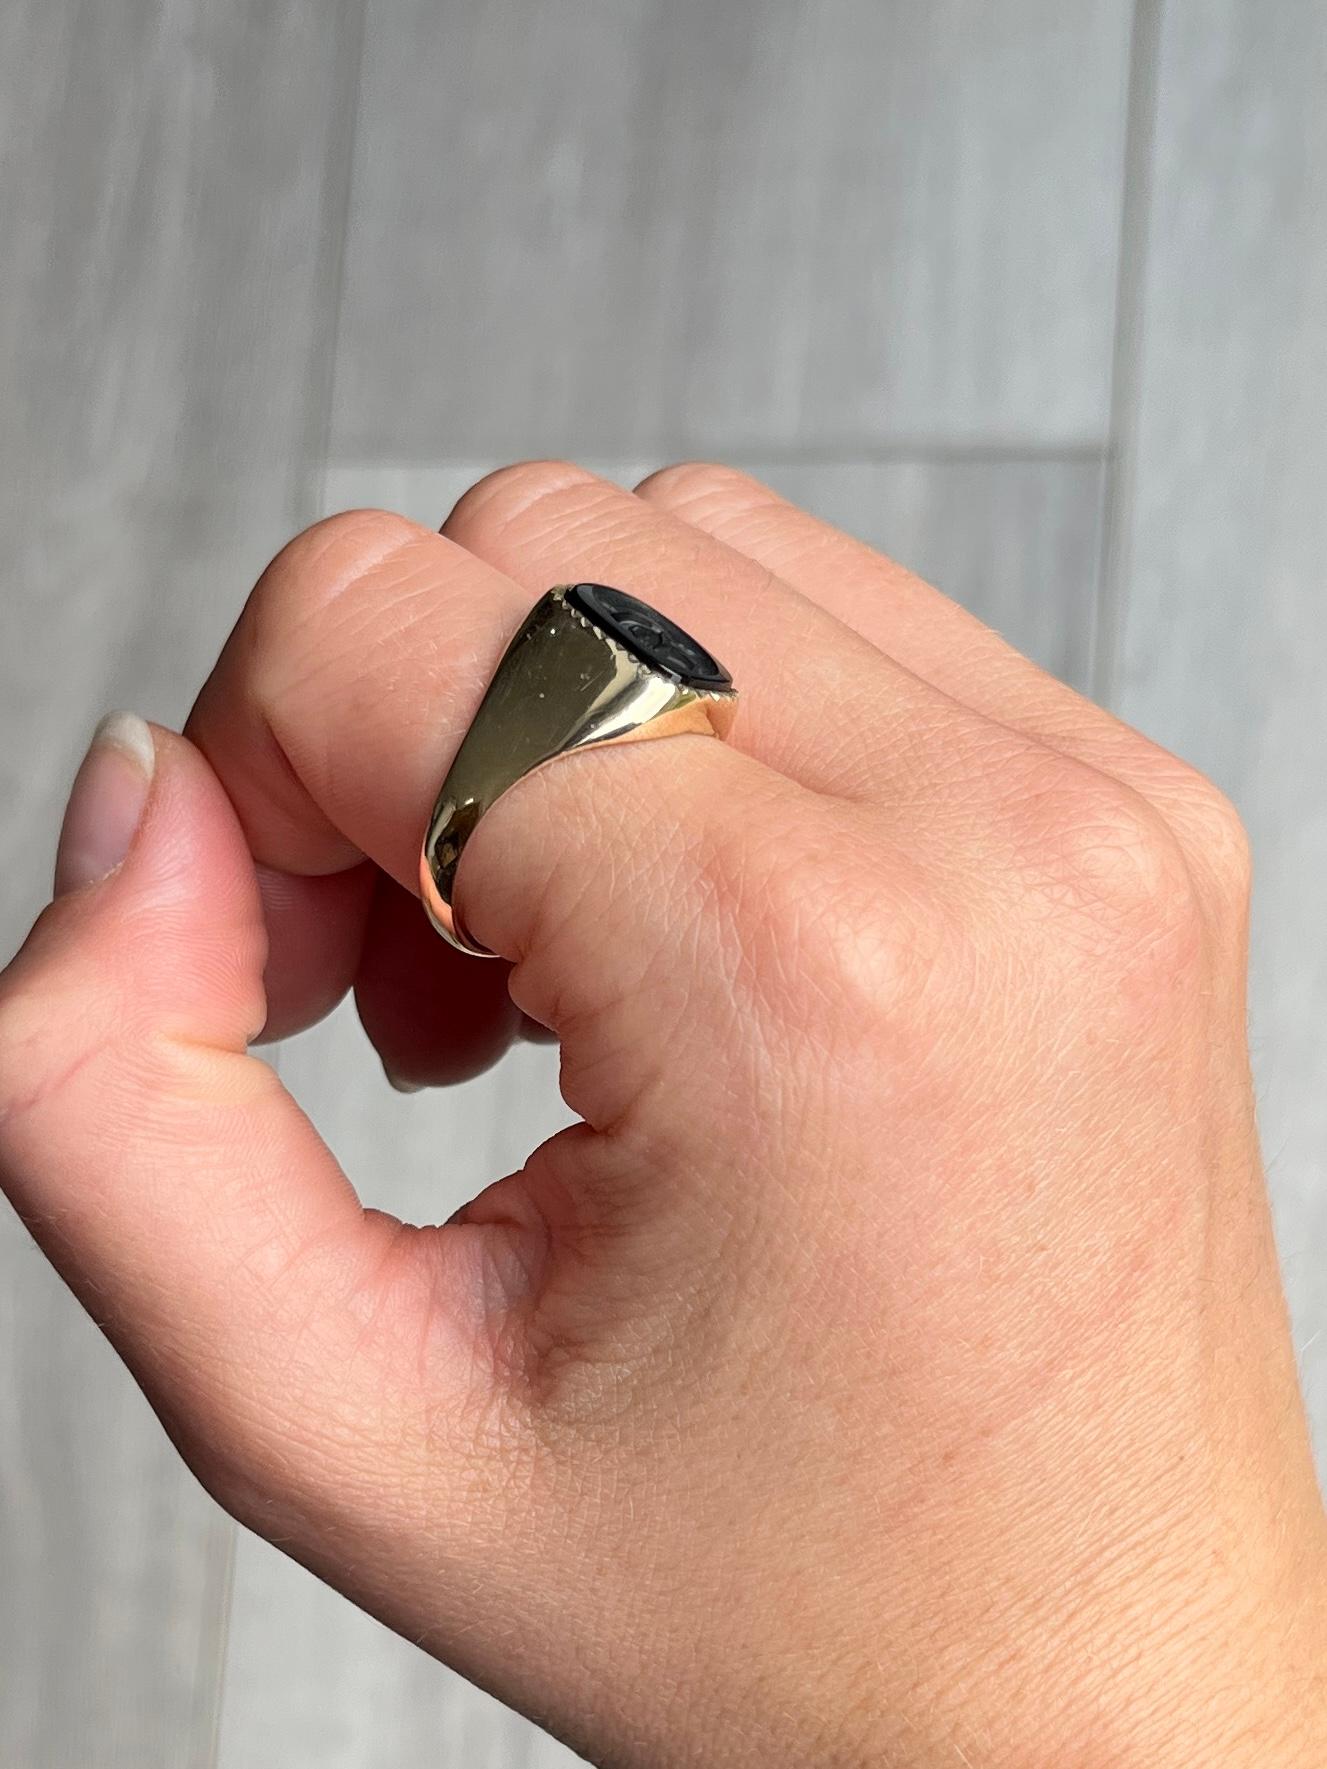 The black stone next to the glossy gold is just gorgeous! The stone has an intaglio of a centurion. 

Ring Size: V or 10 1/2  
Stone Dimensions: 12x10mm 

Weight: 4.1g

